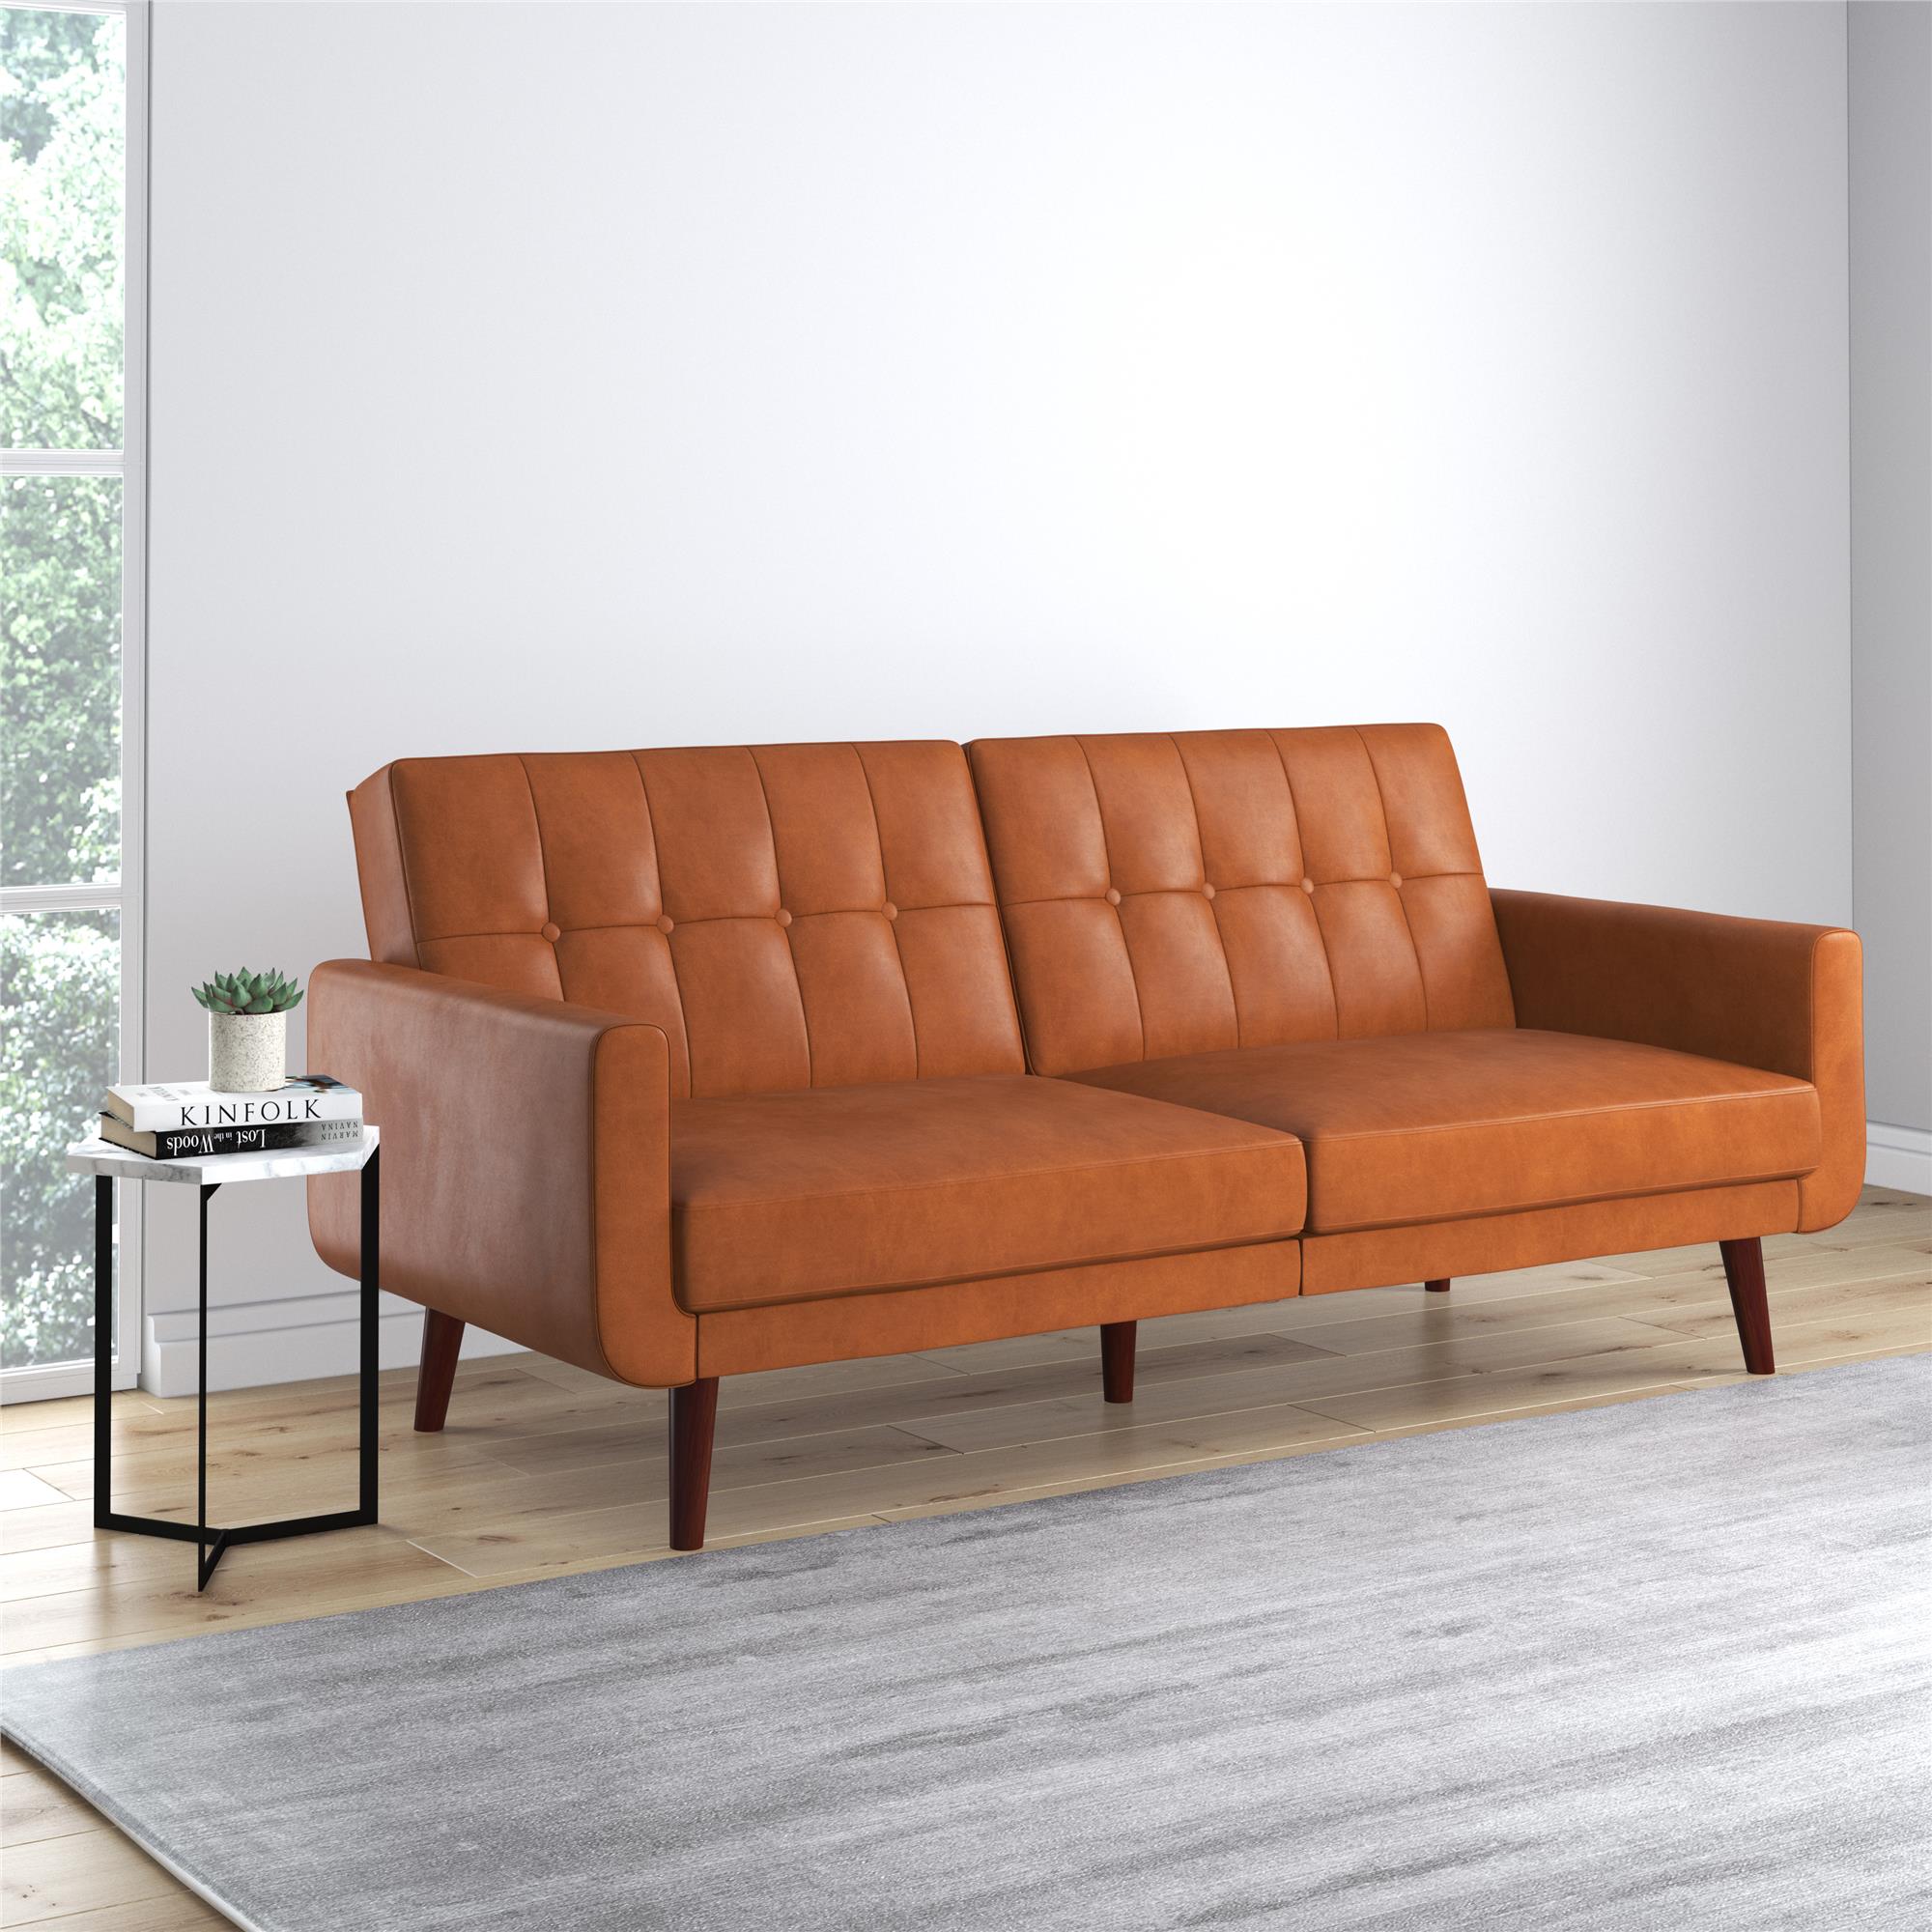 Better Homes & Gardens Nola Modern Futon, Camel Faux Leather - image 1 of 17